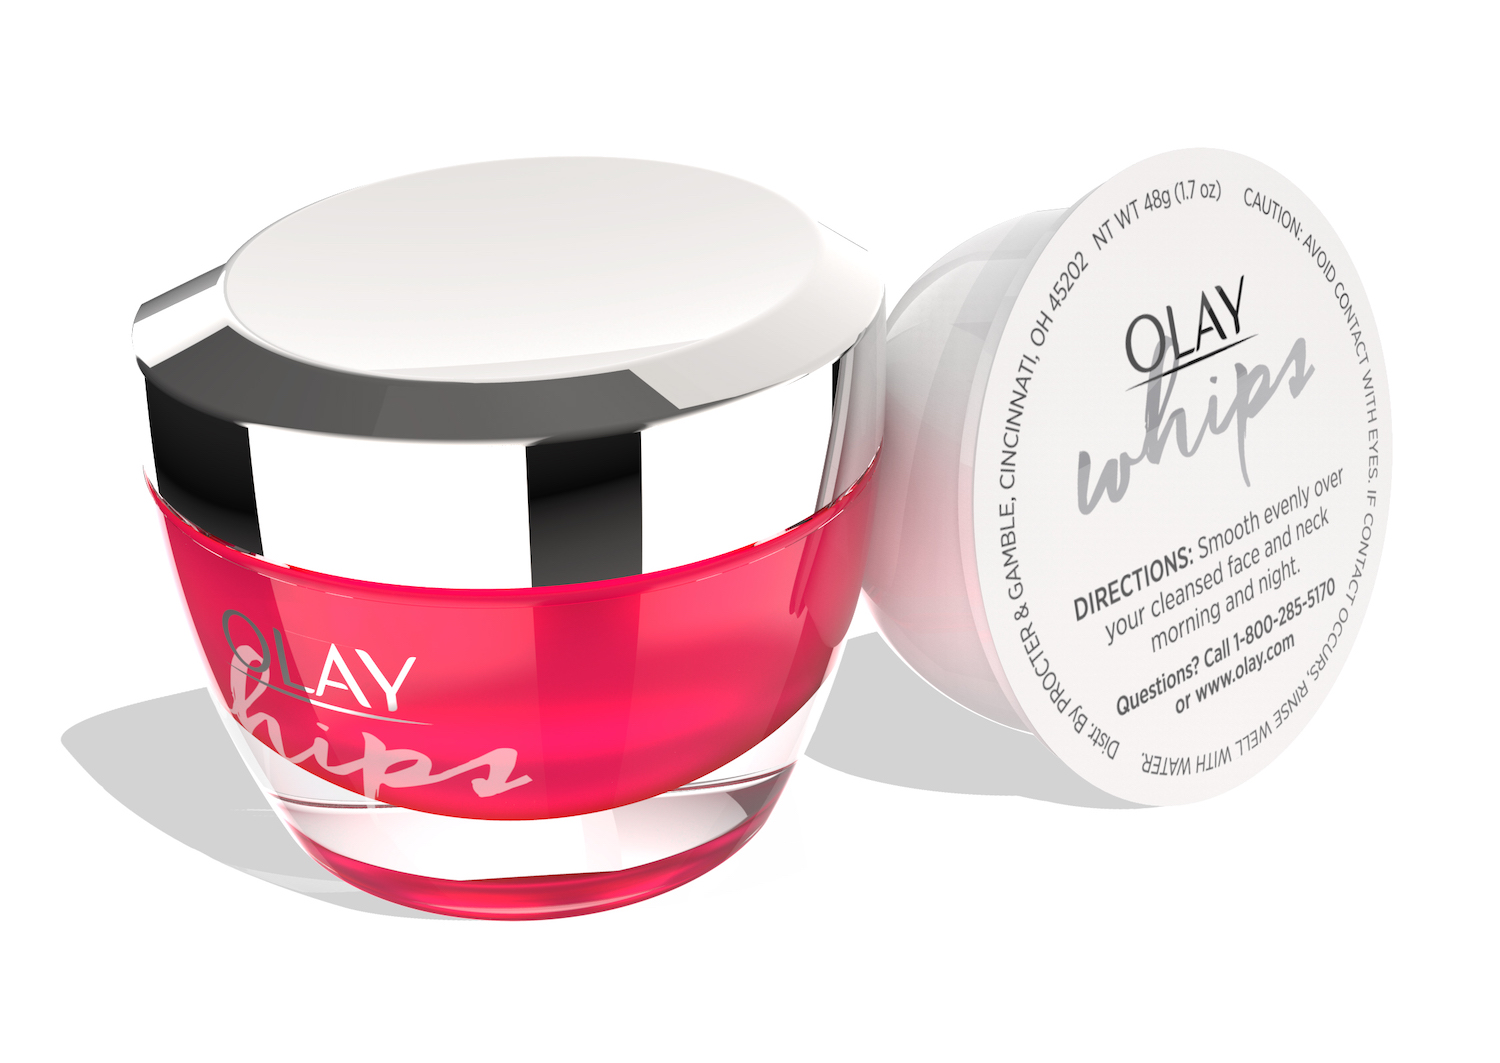 Olay refillable and sustainable packaging